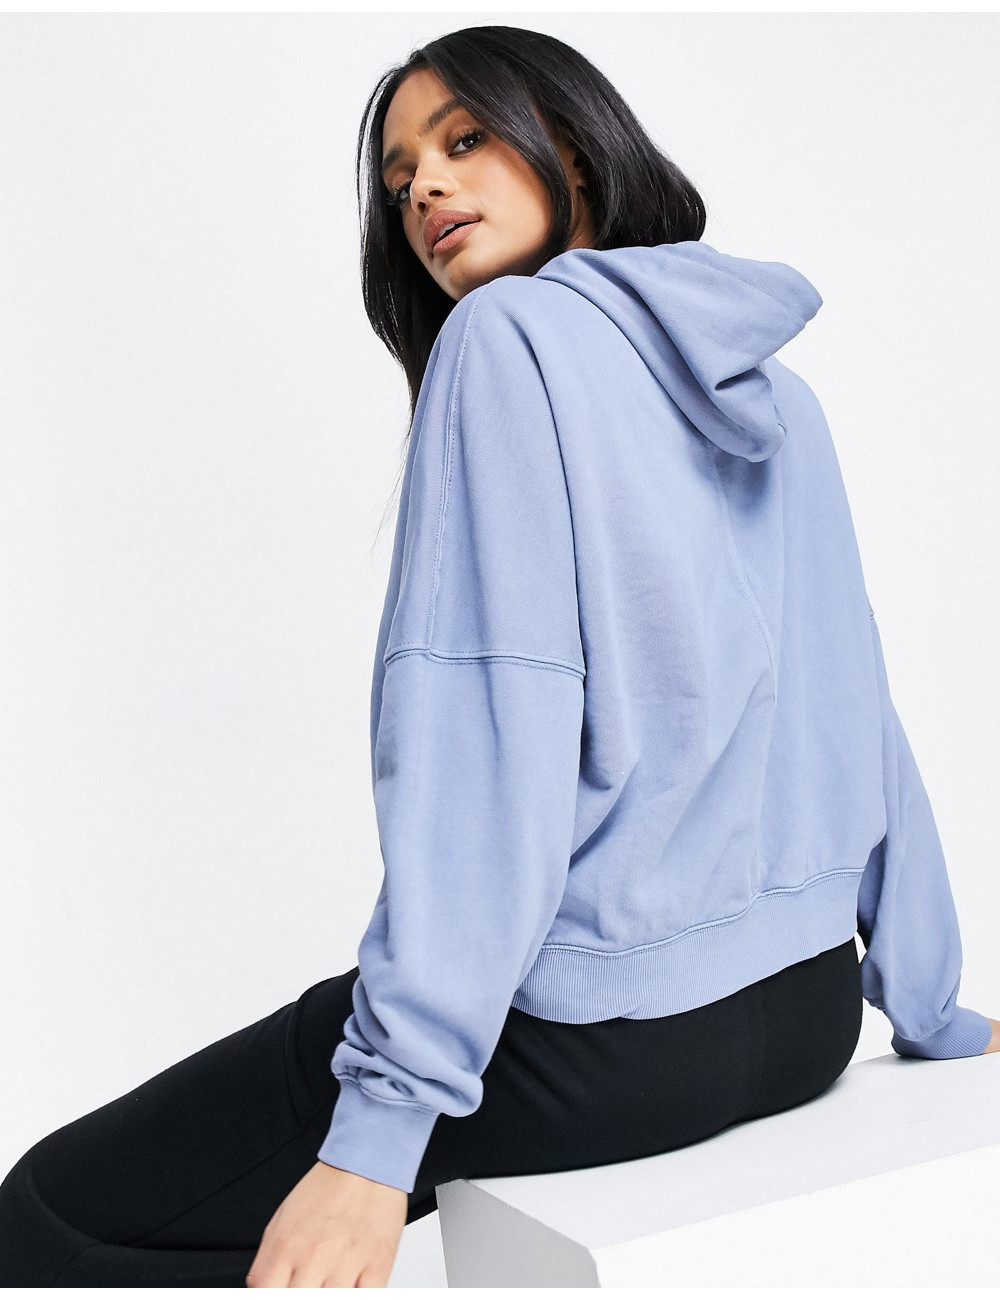 Cotton:On hoodie in blue